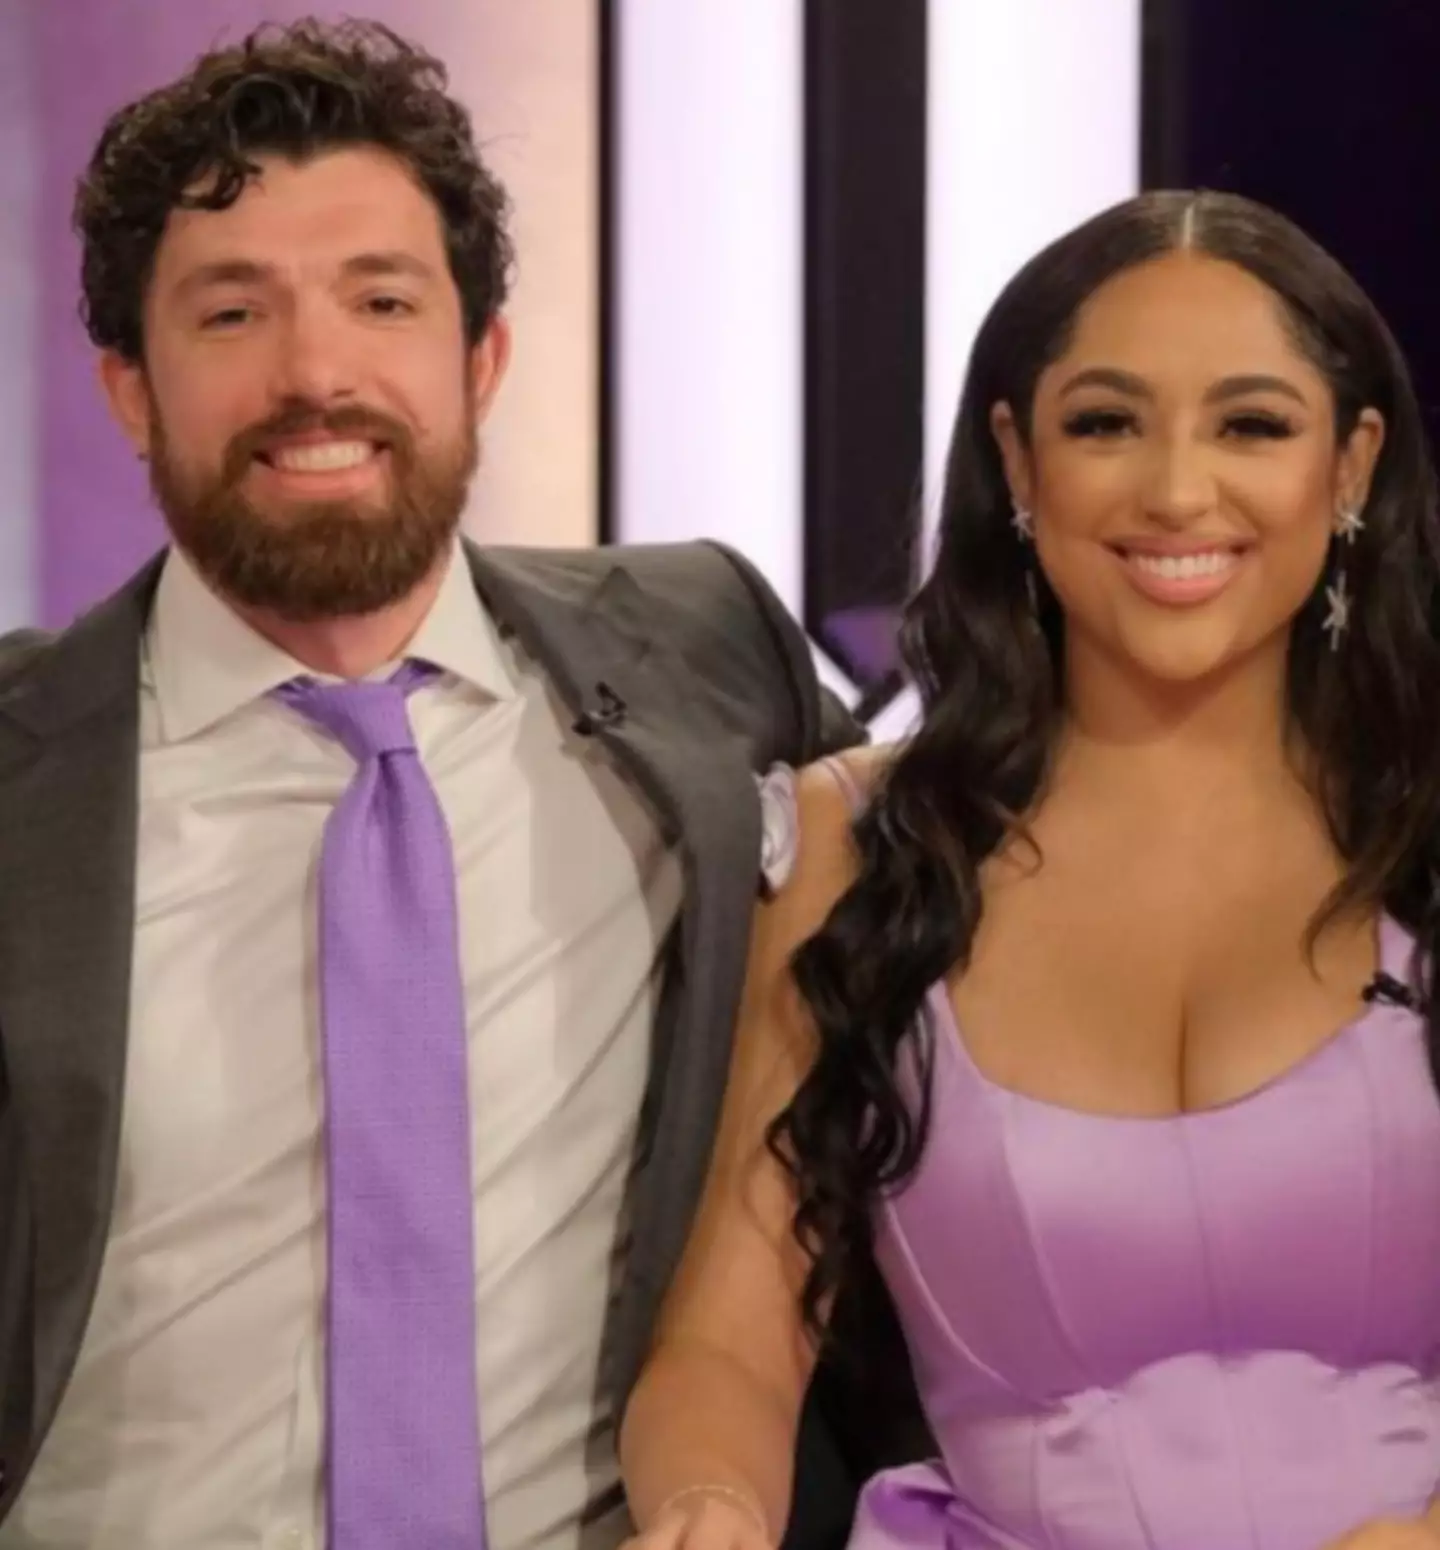 The pair first crossed paths on the fourth season of the Netflix dating show.